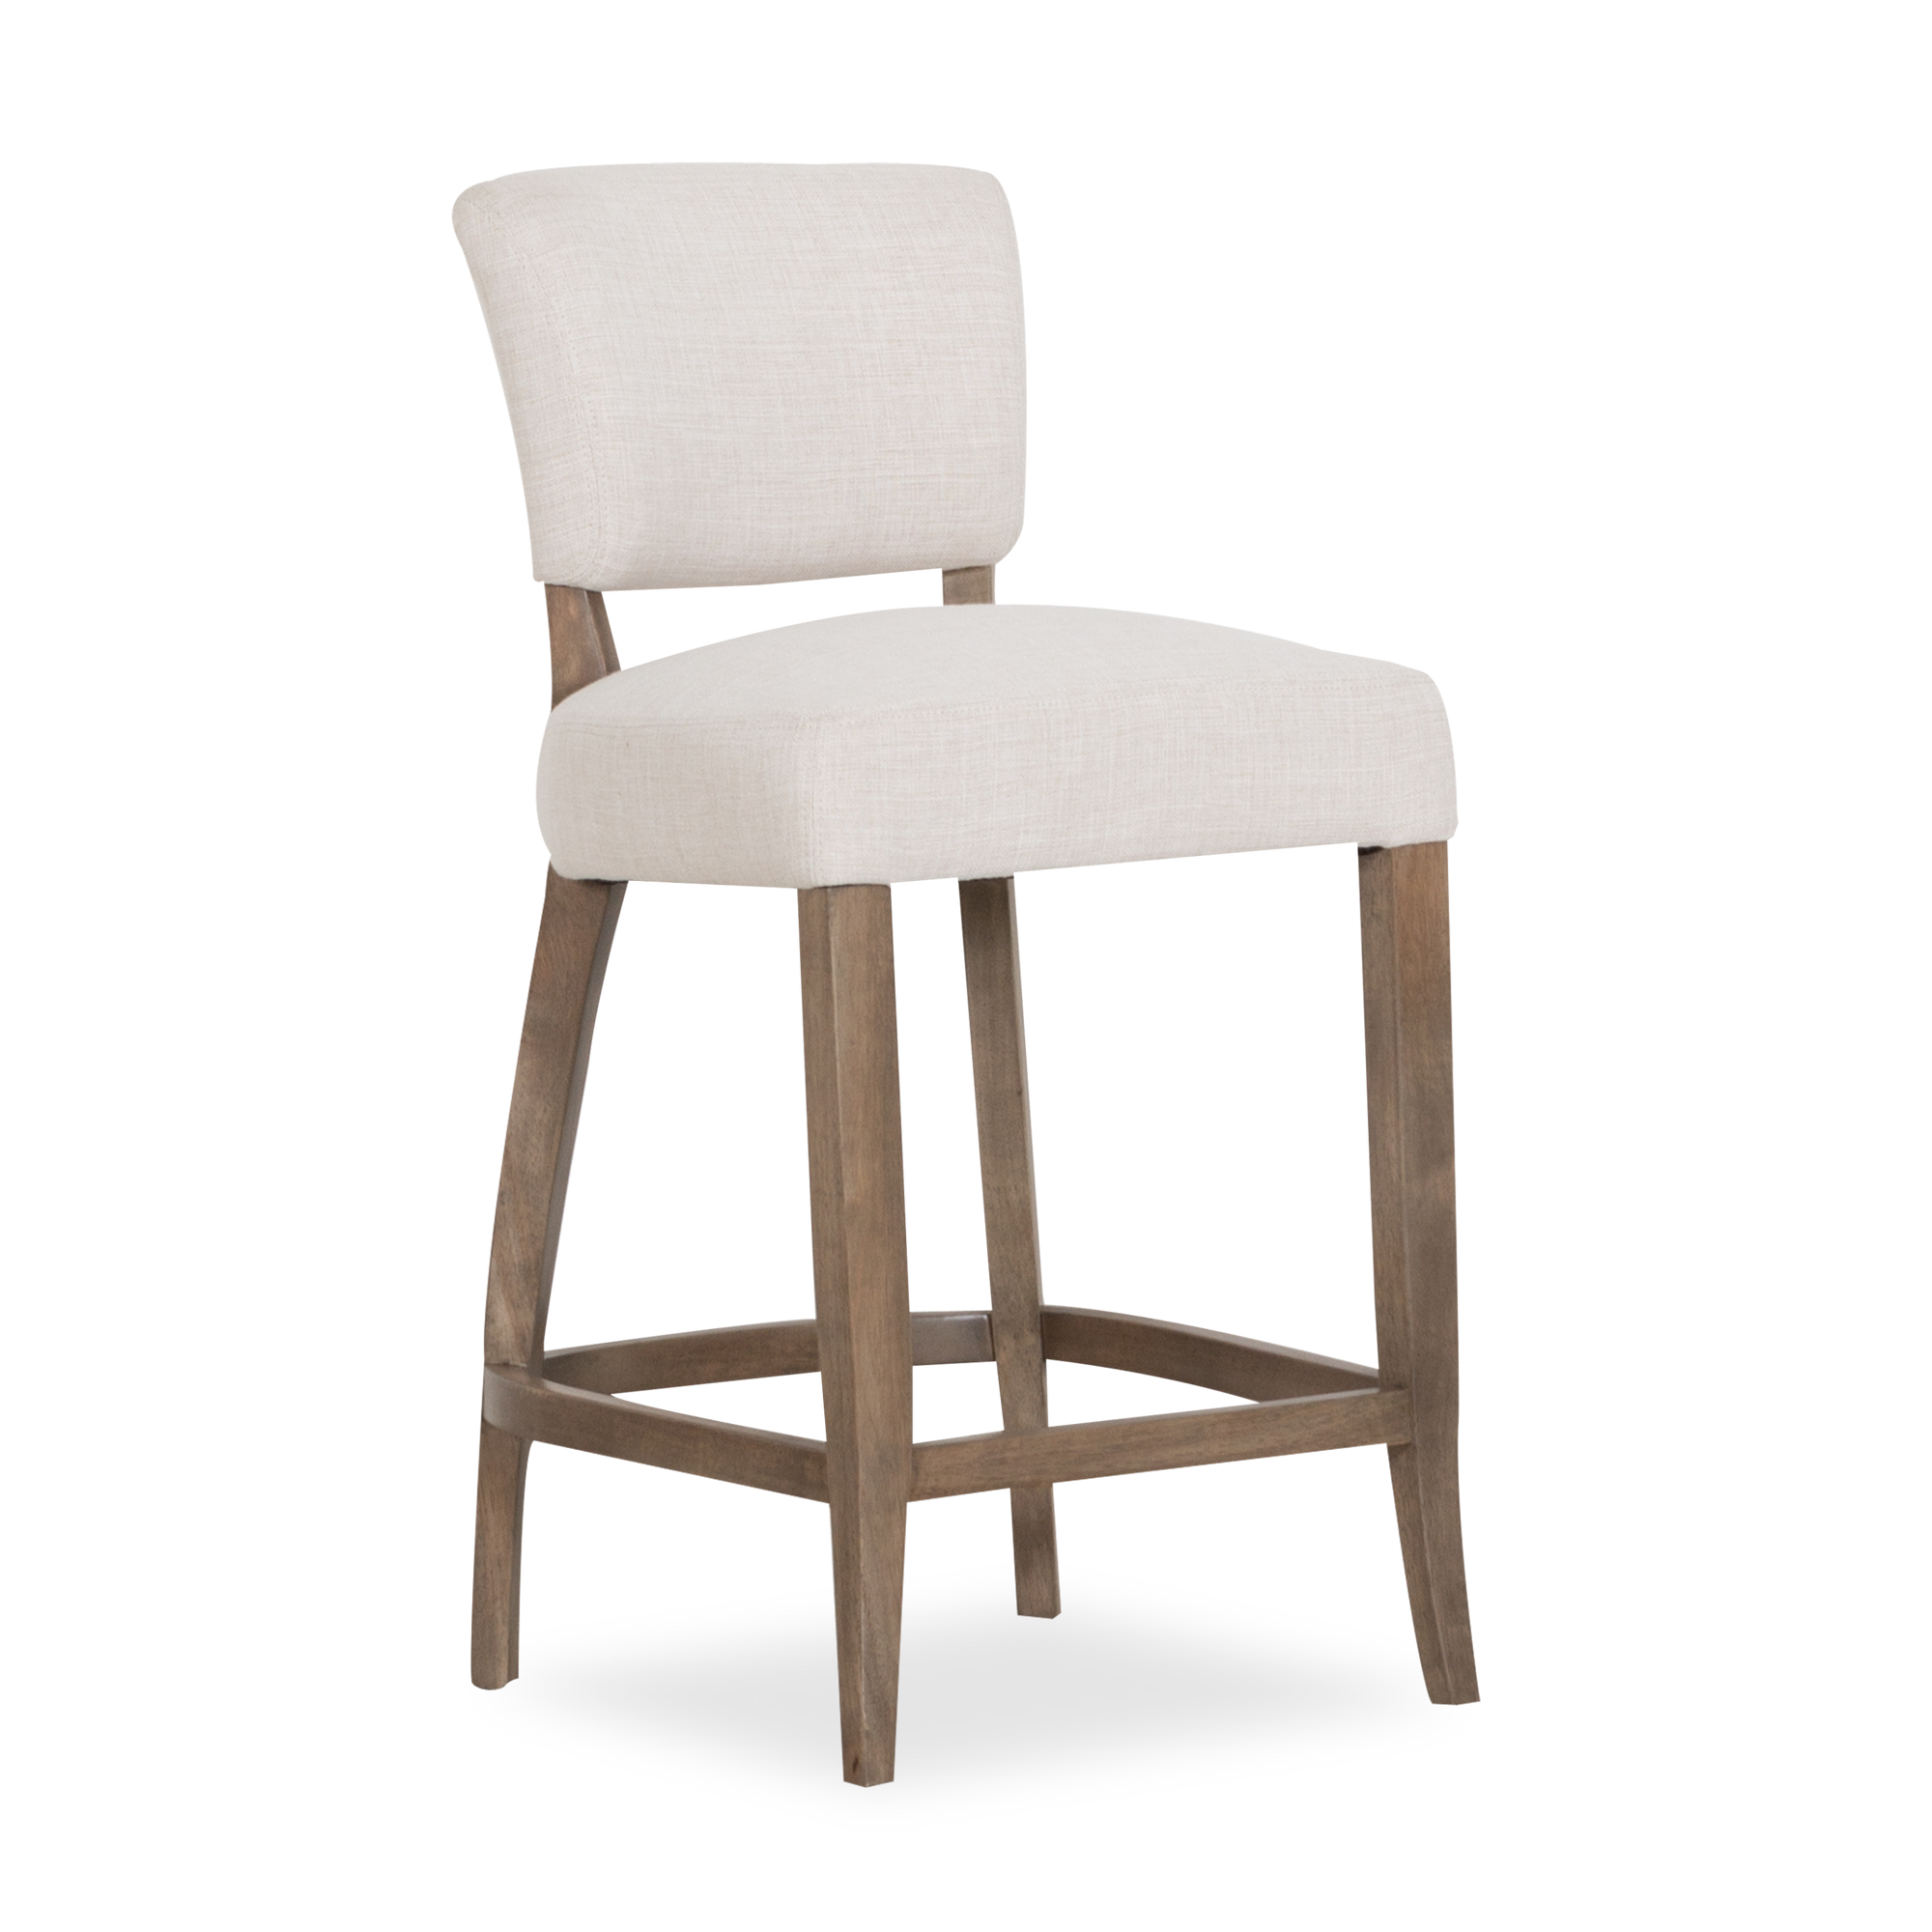 A counter stool version of the classic Mimi, the Mimi Counter Stool lends itself to both modern and classic interiors.